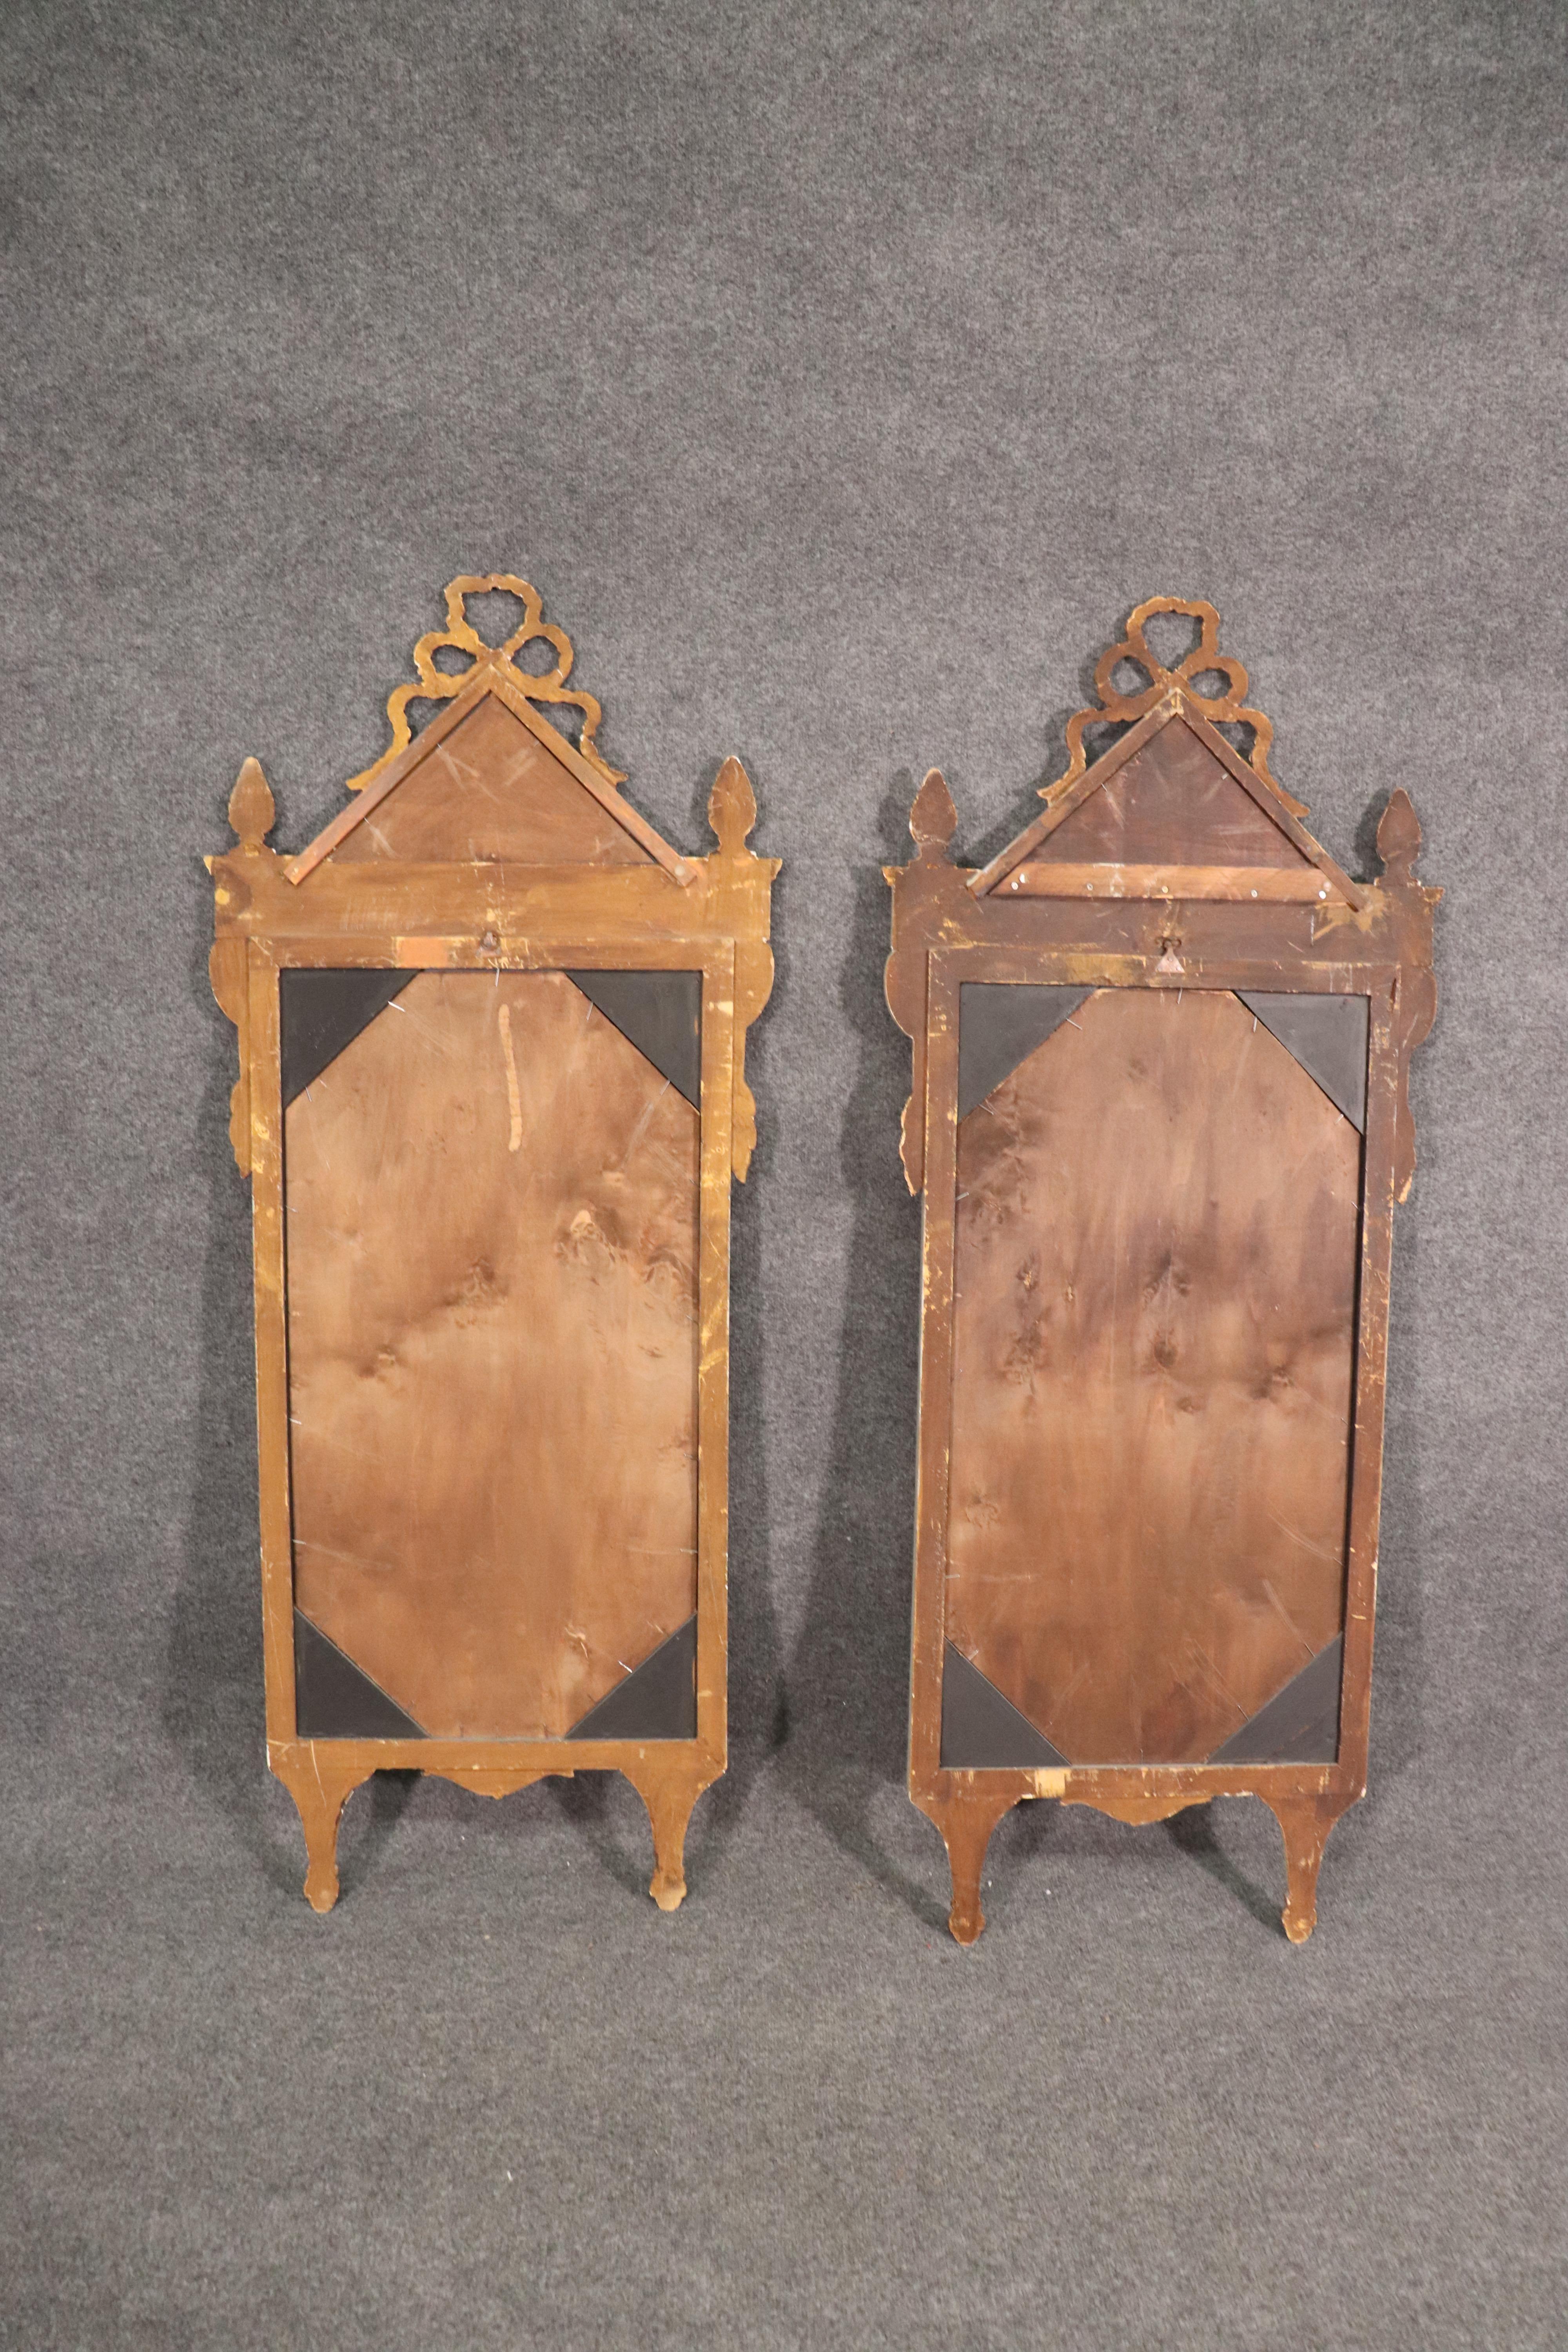 Fruitwood Pair of Venetian Italian Patinated Mirrored Glass Painted Gilded Mirrors